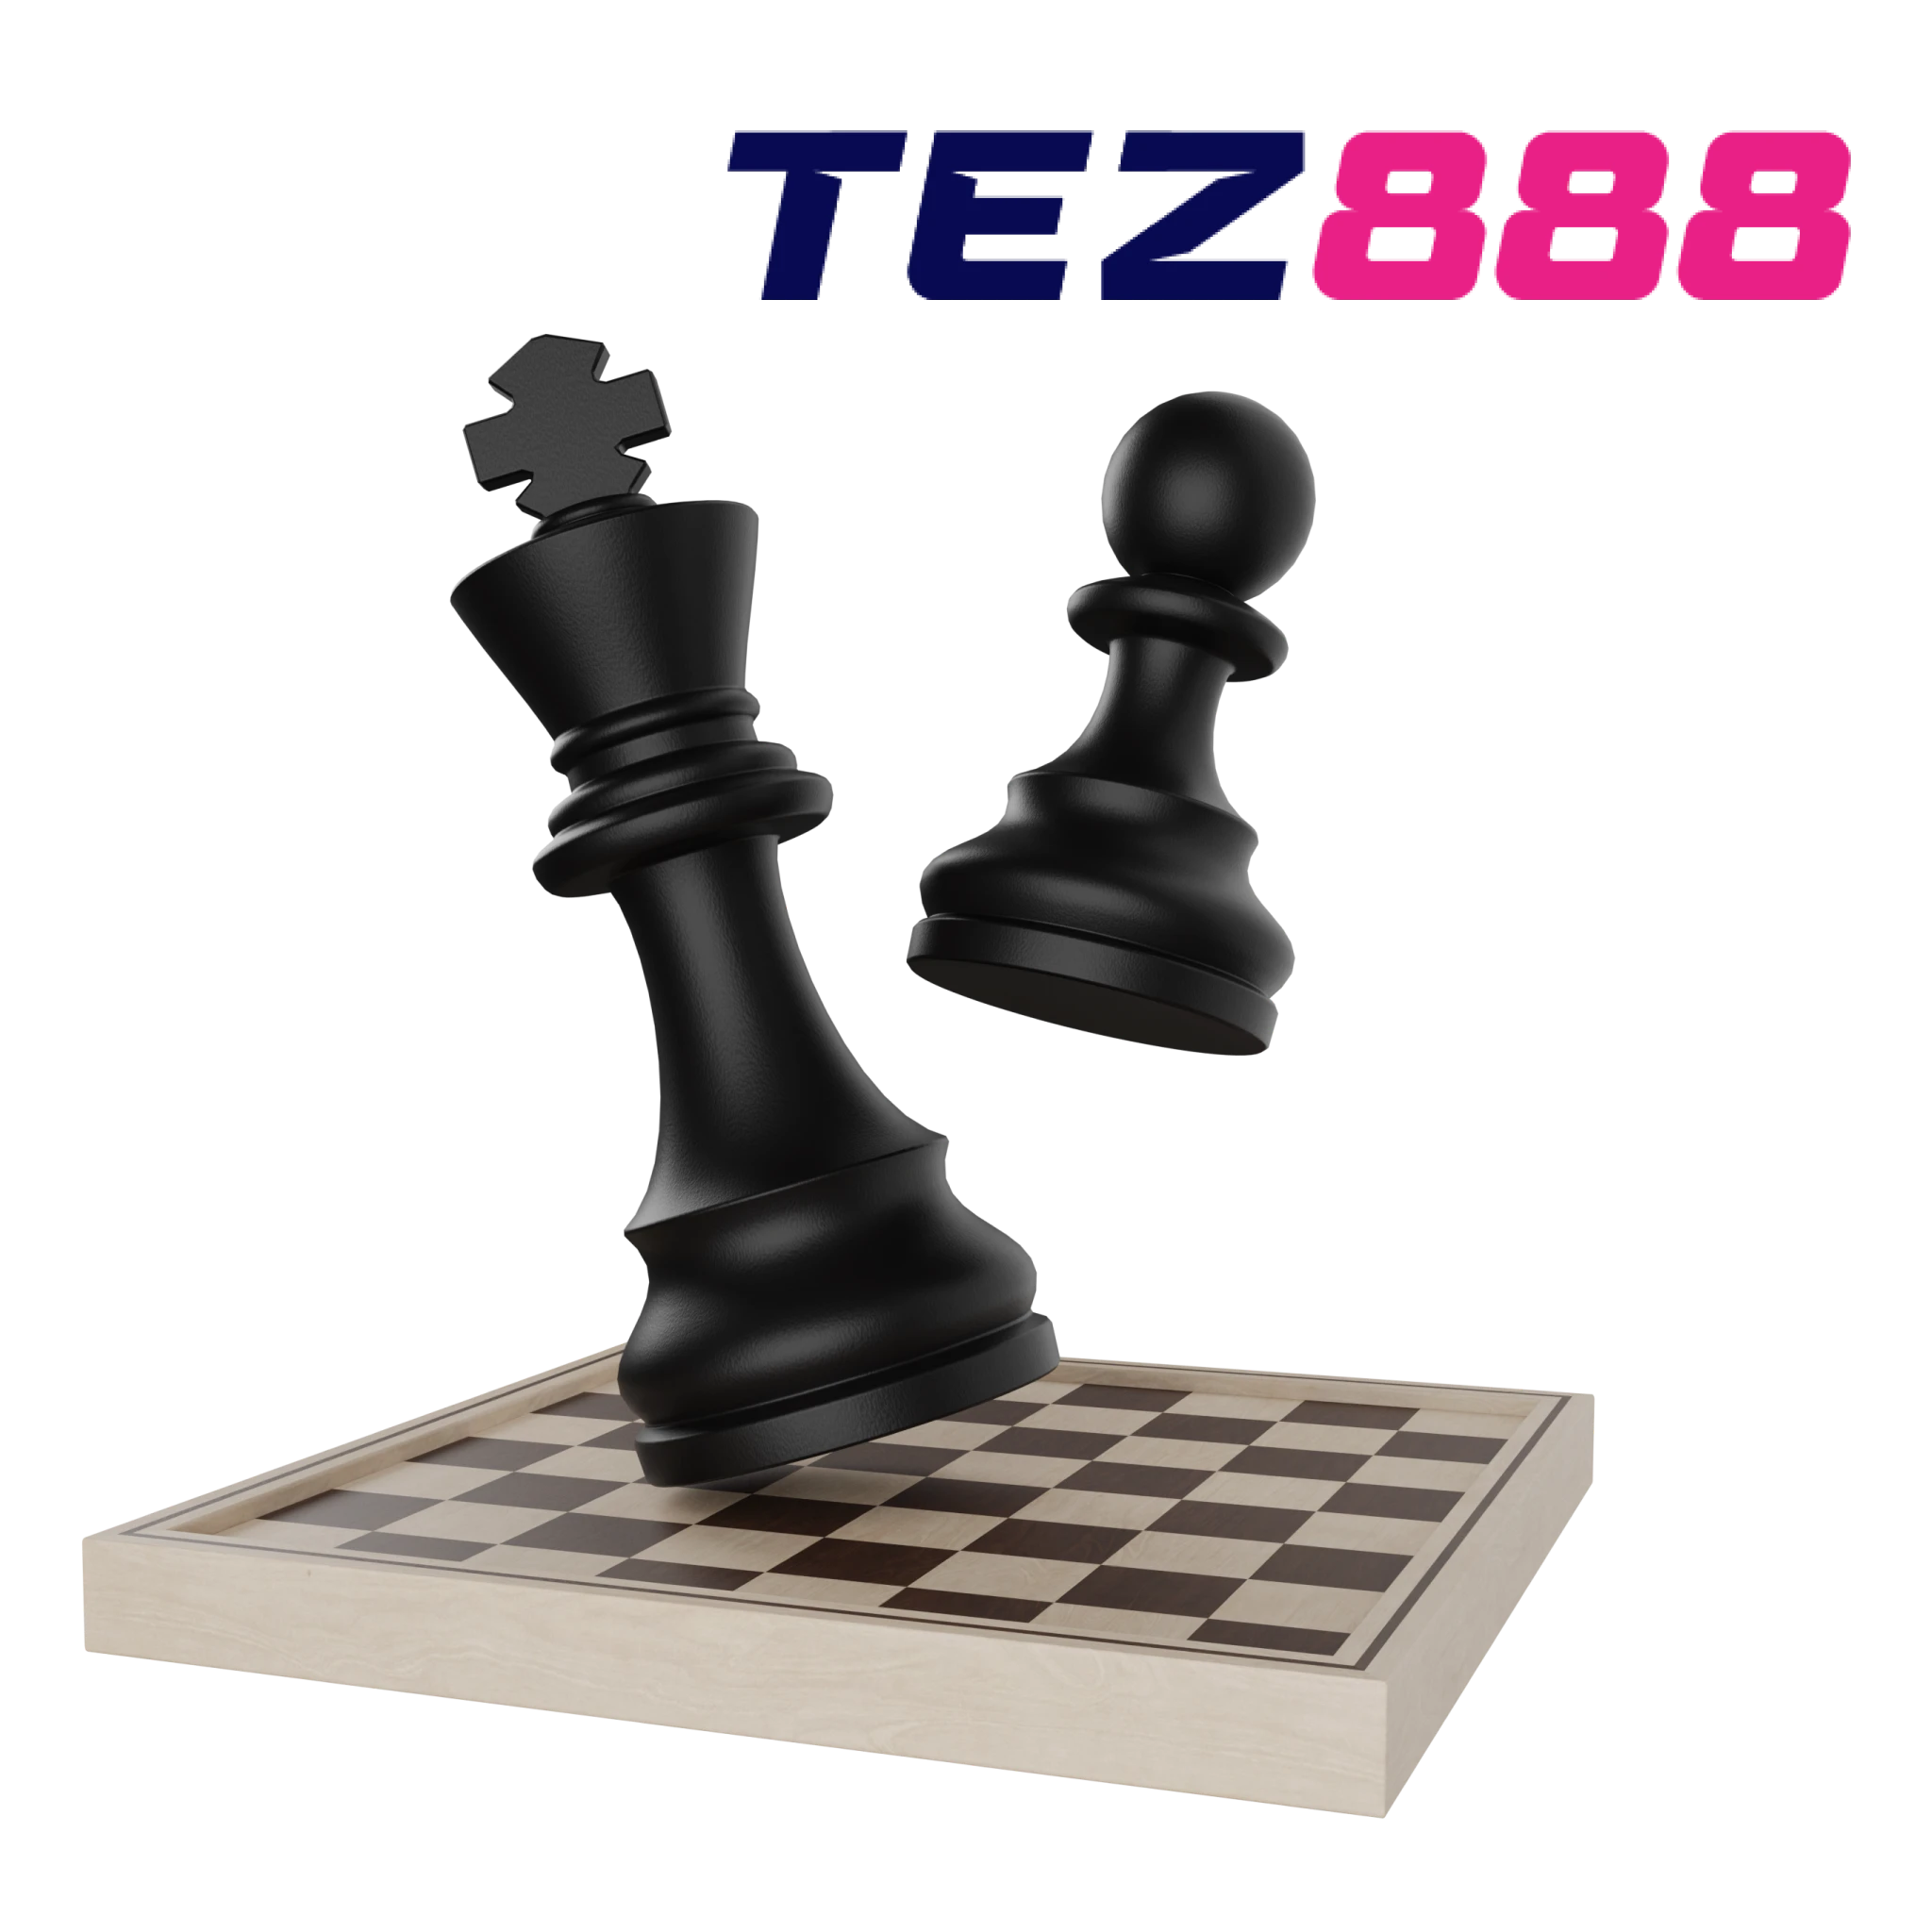 Tez888 provides a diverse experience for chess players of all skill levels.